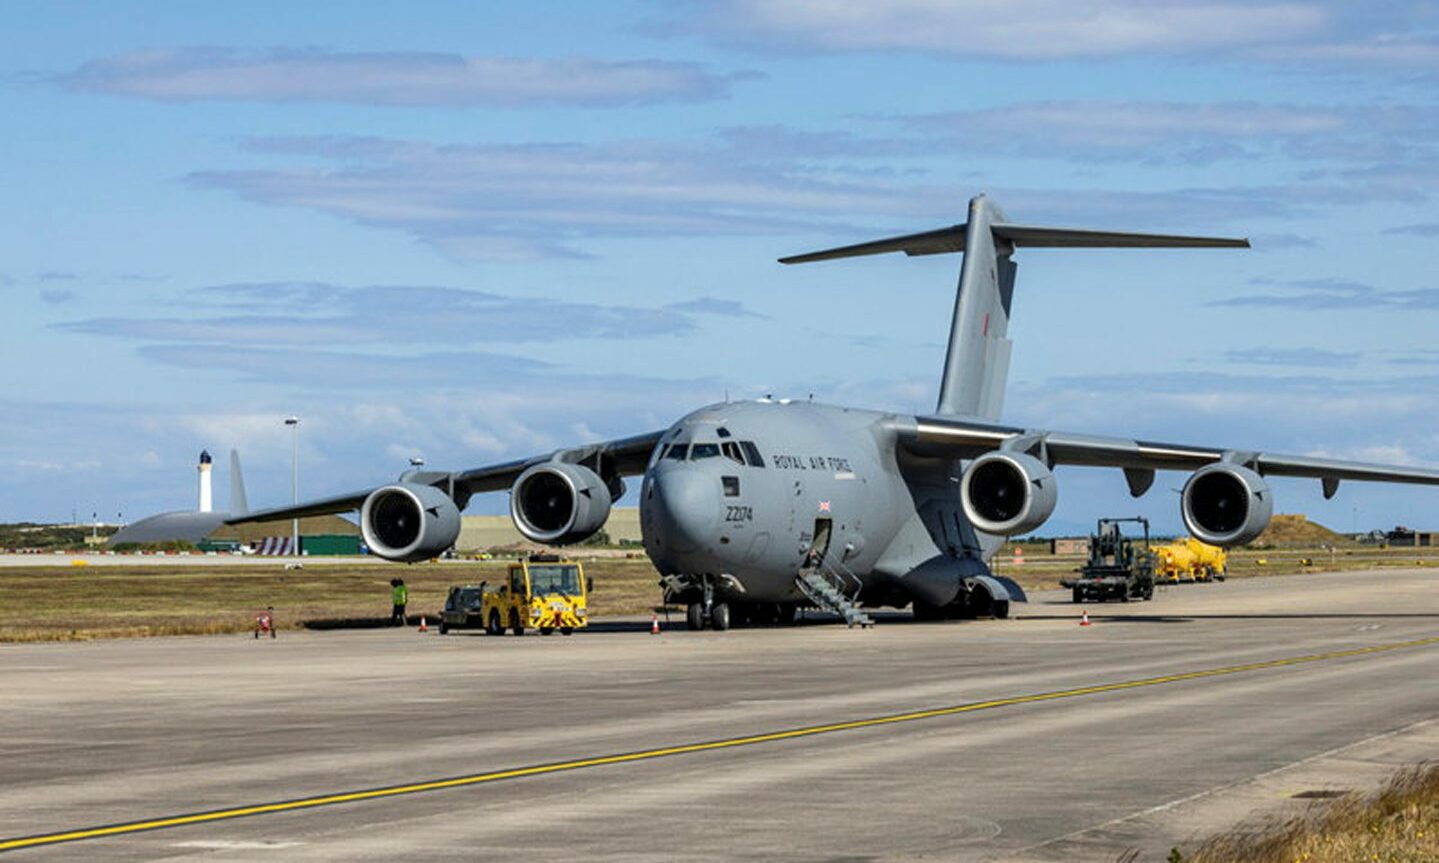 Aircraft on the ground at RAF Lossiemouth.